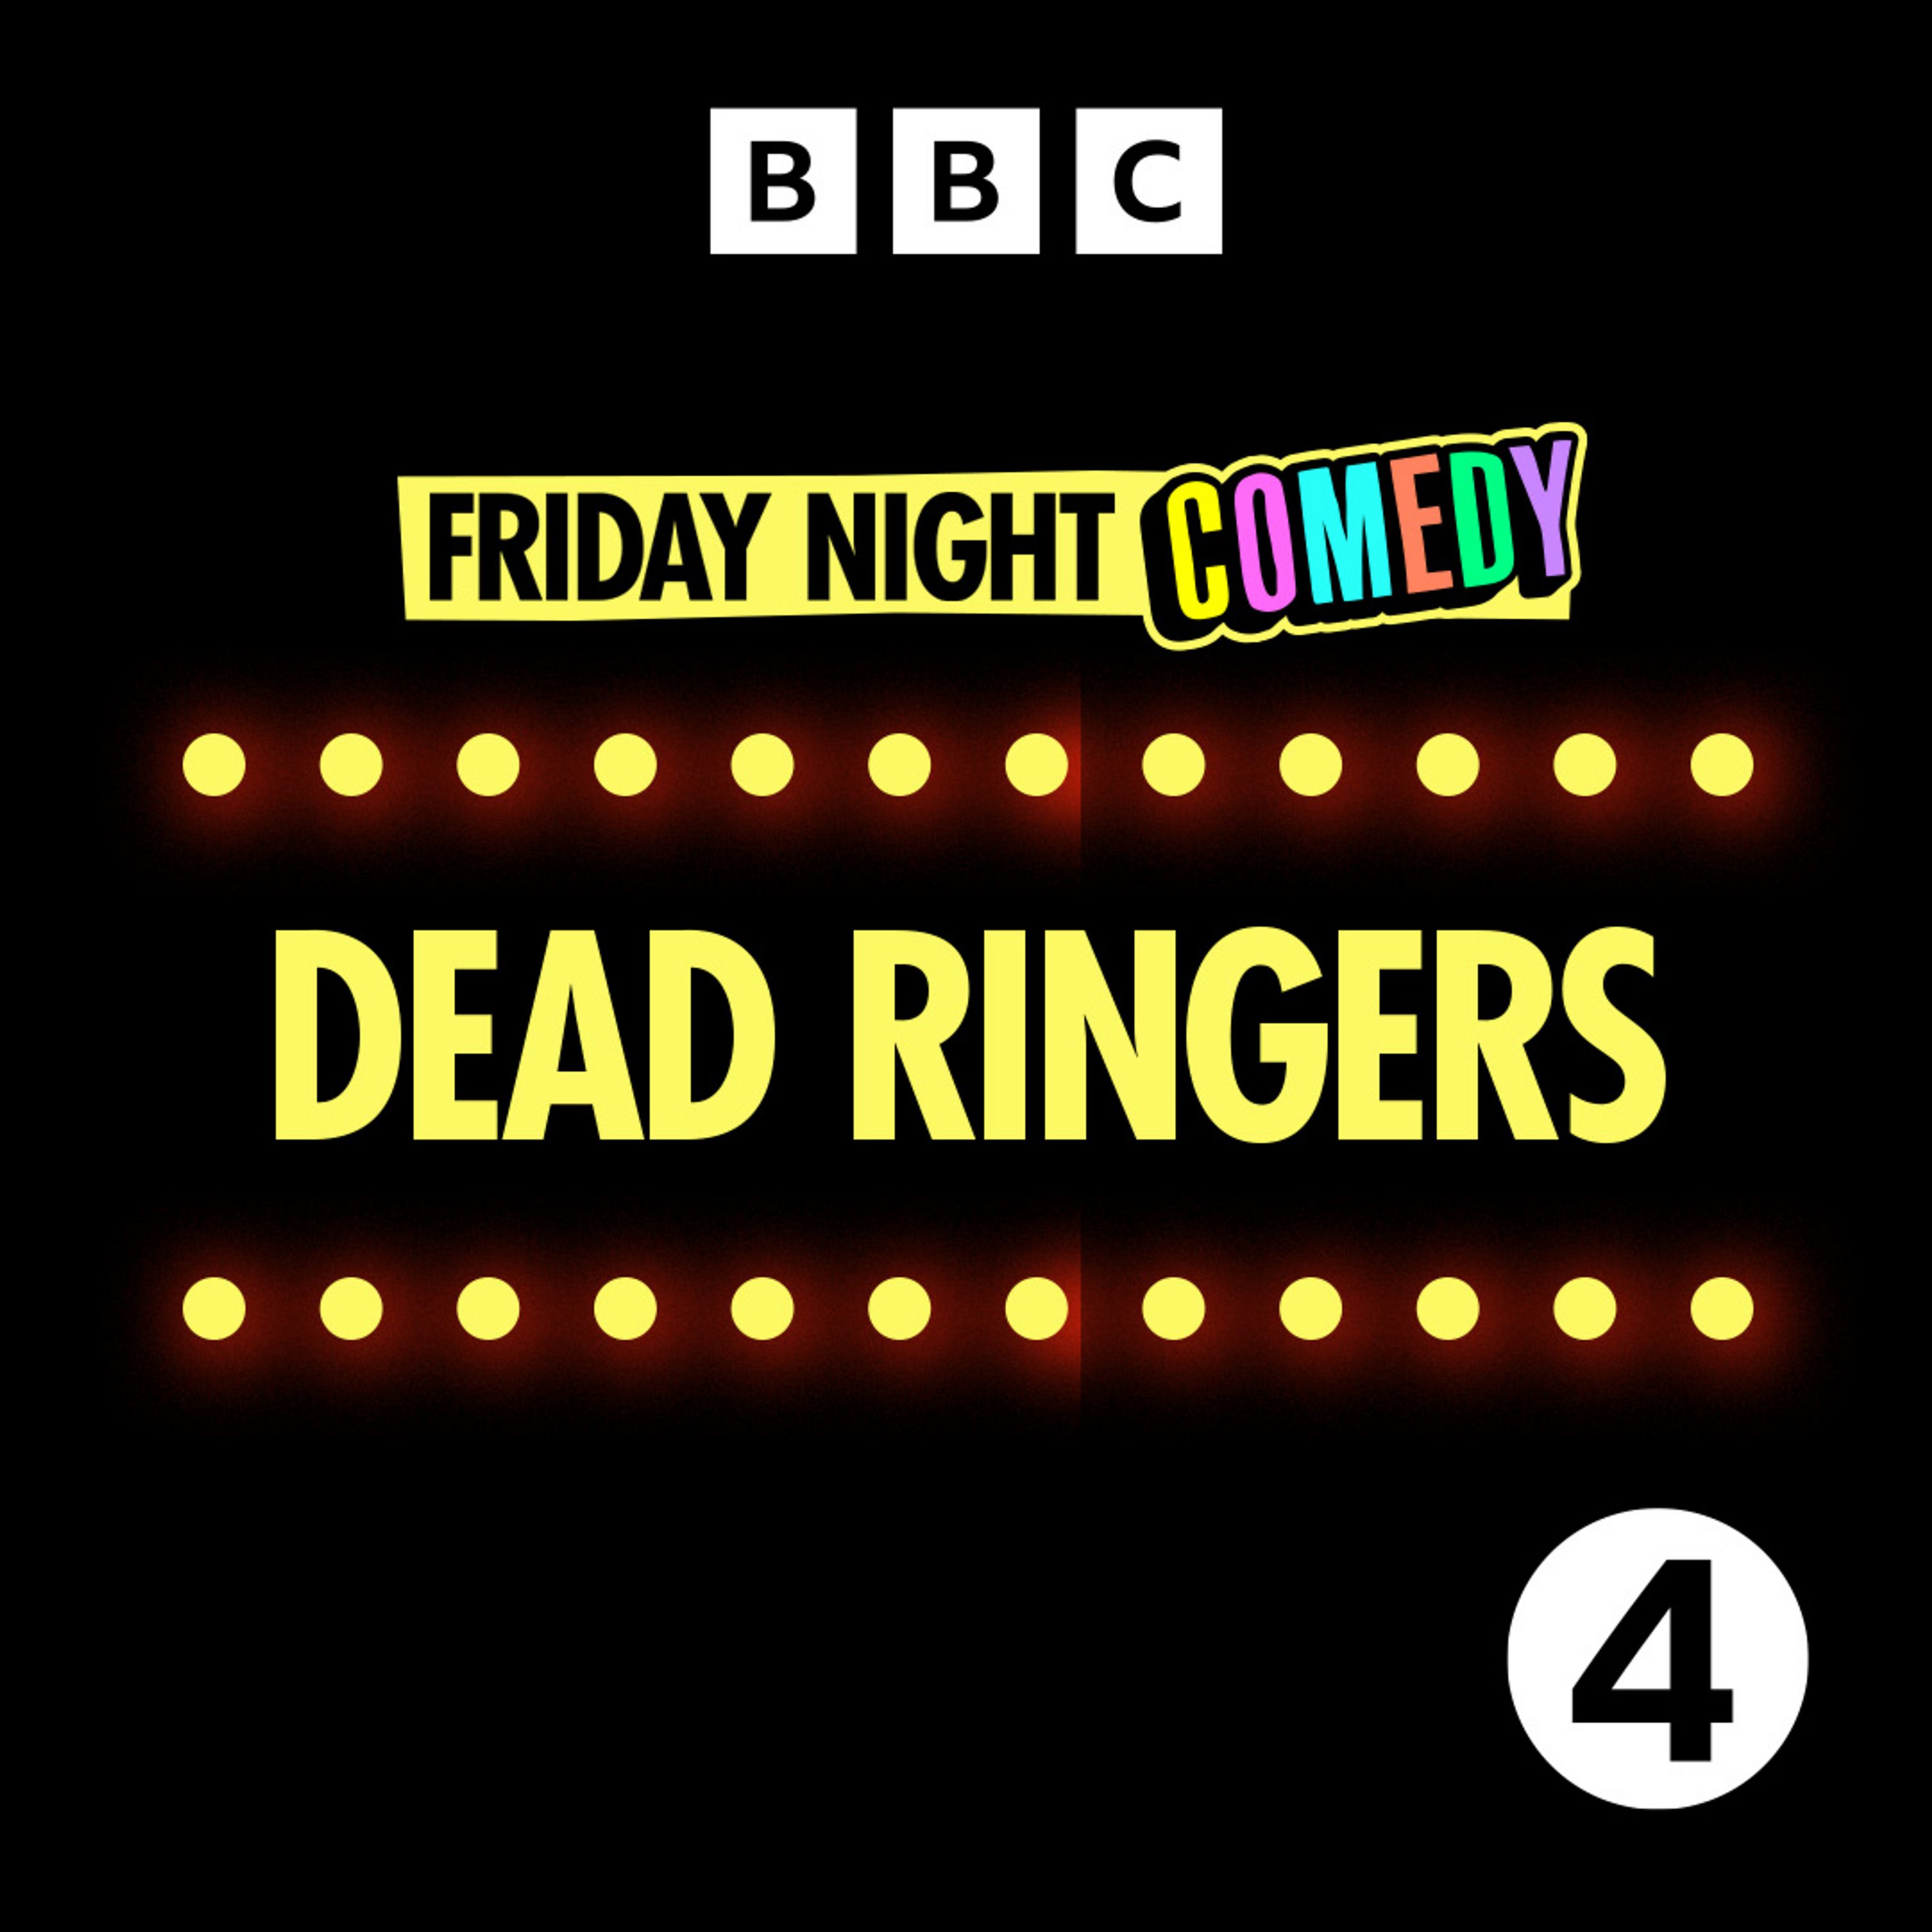 Dead Ringers - 24th May